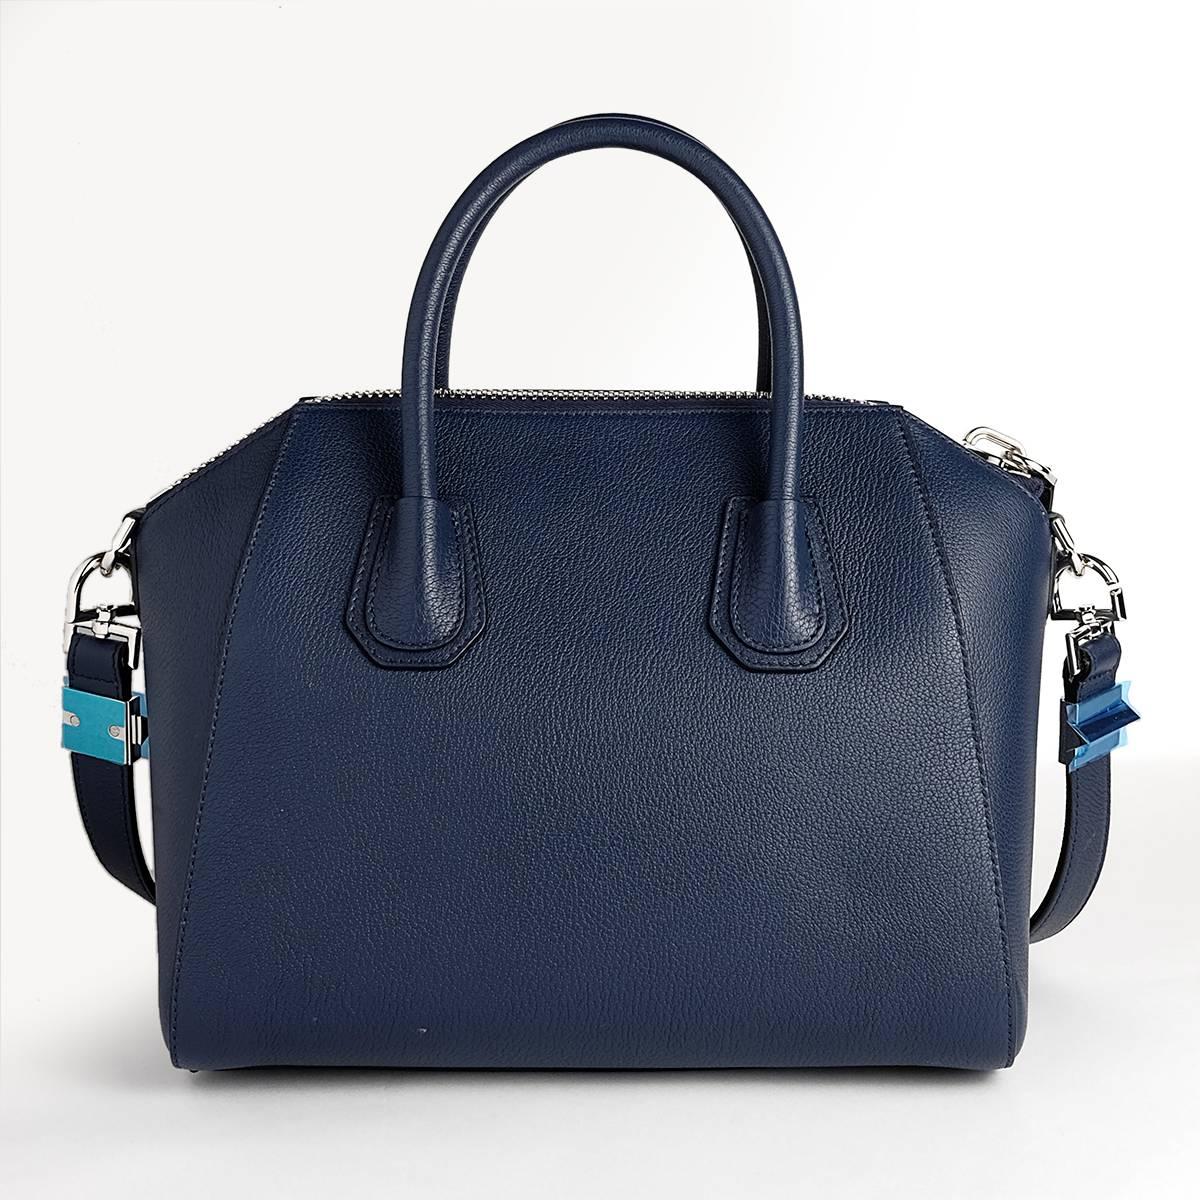 Small Antigona in Blue Goat leather with two handles and strap.
The bag has never been used and comes with original tags and dustbag.
